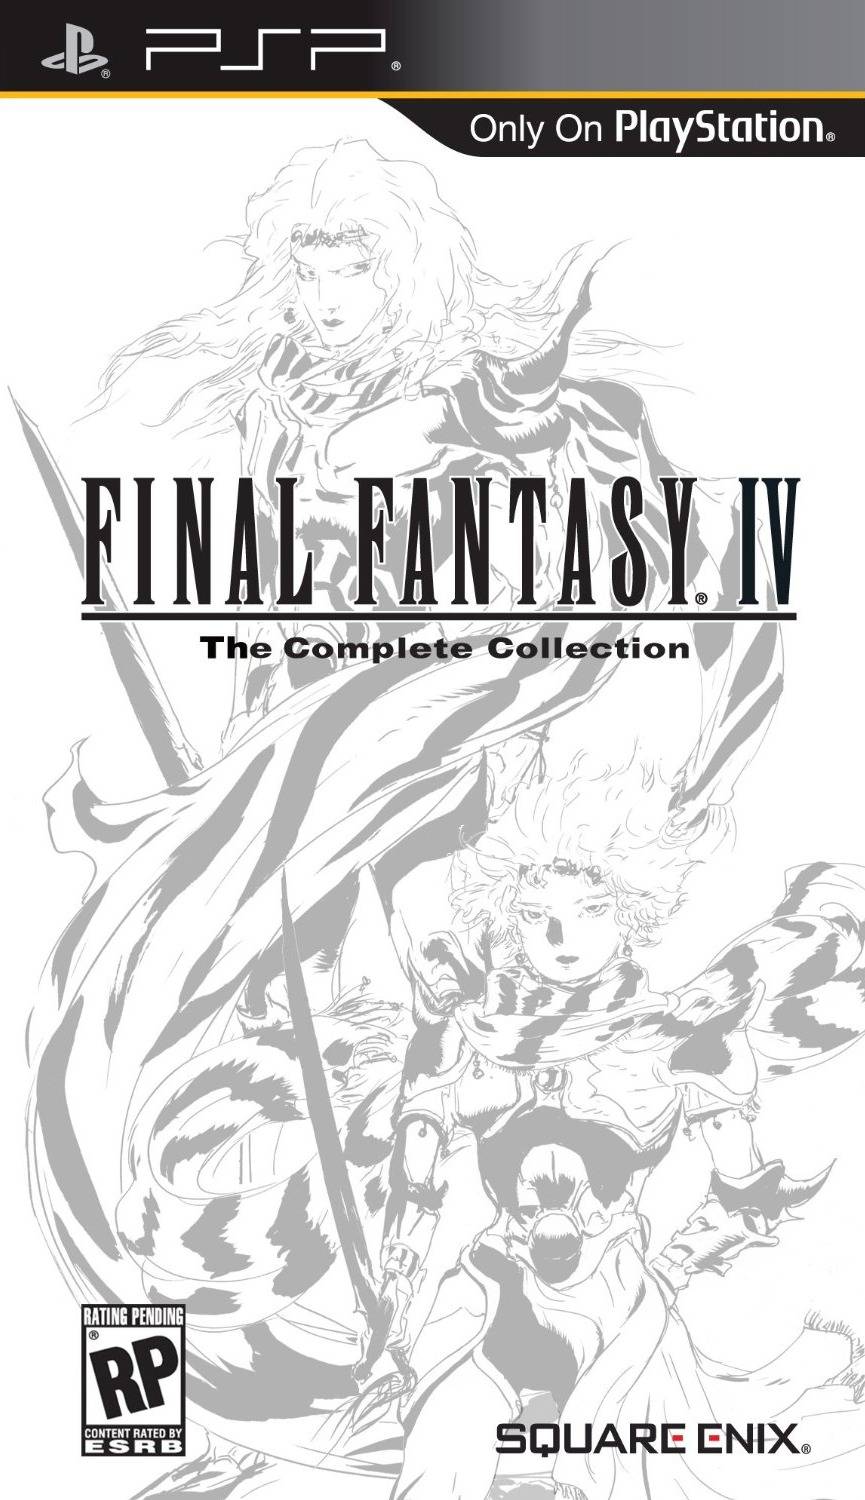 240633_final-fantasy-iv-complete-collection